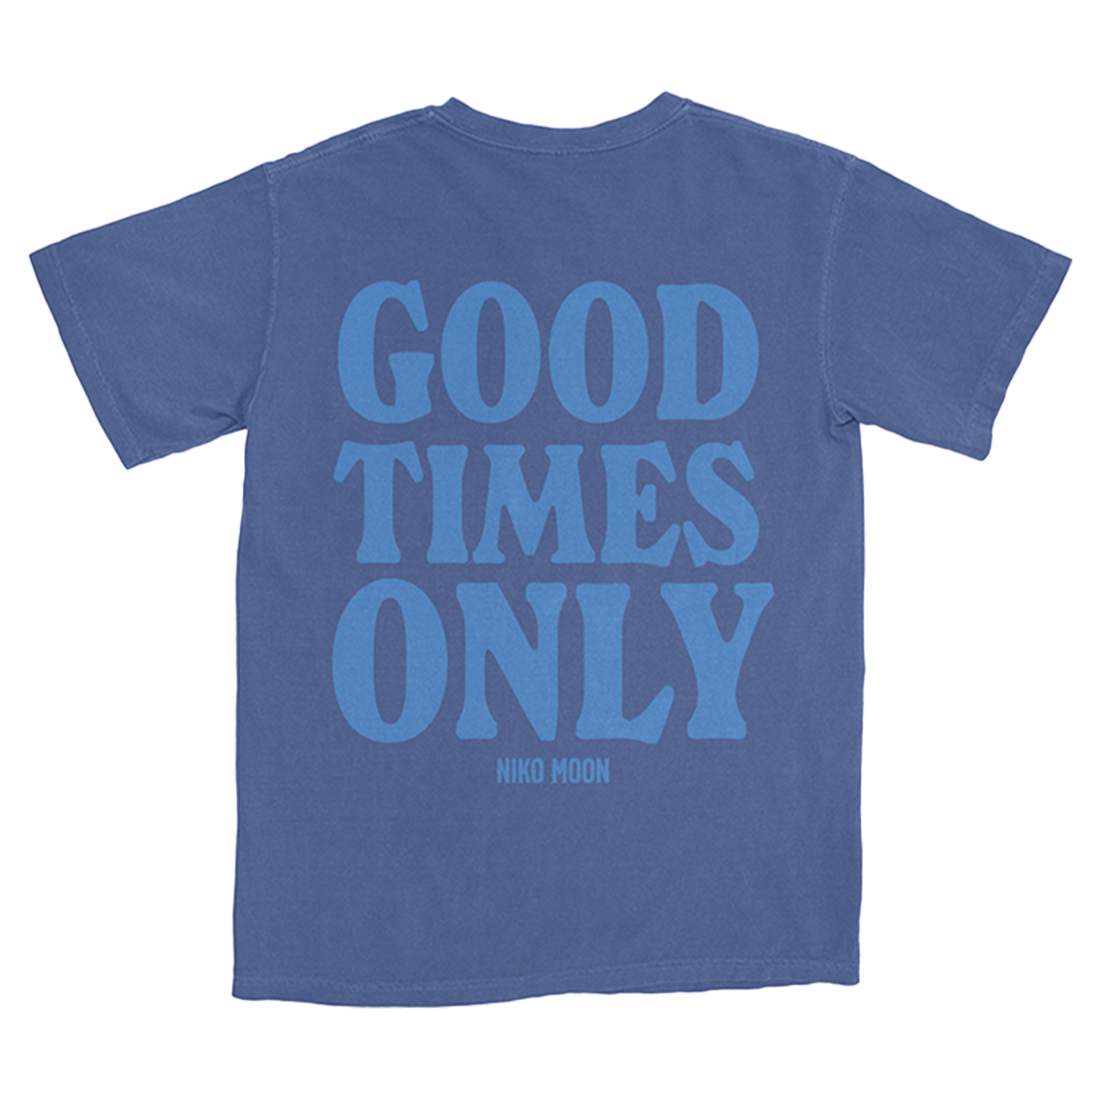 Good Times Only Tee - Blue